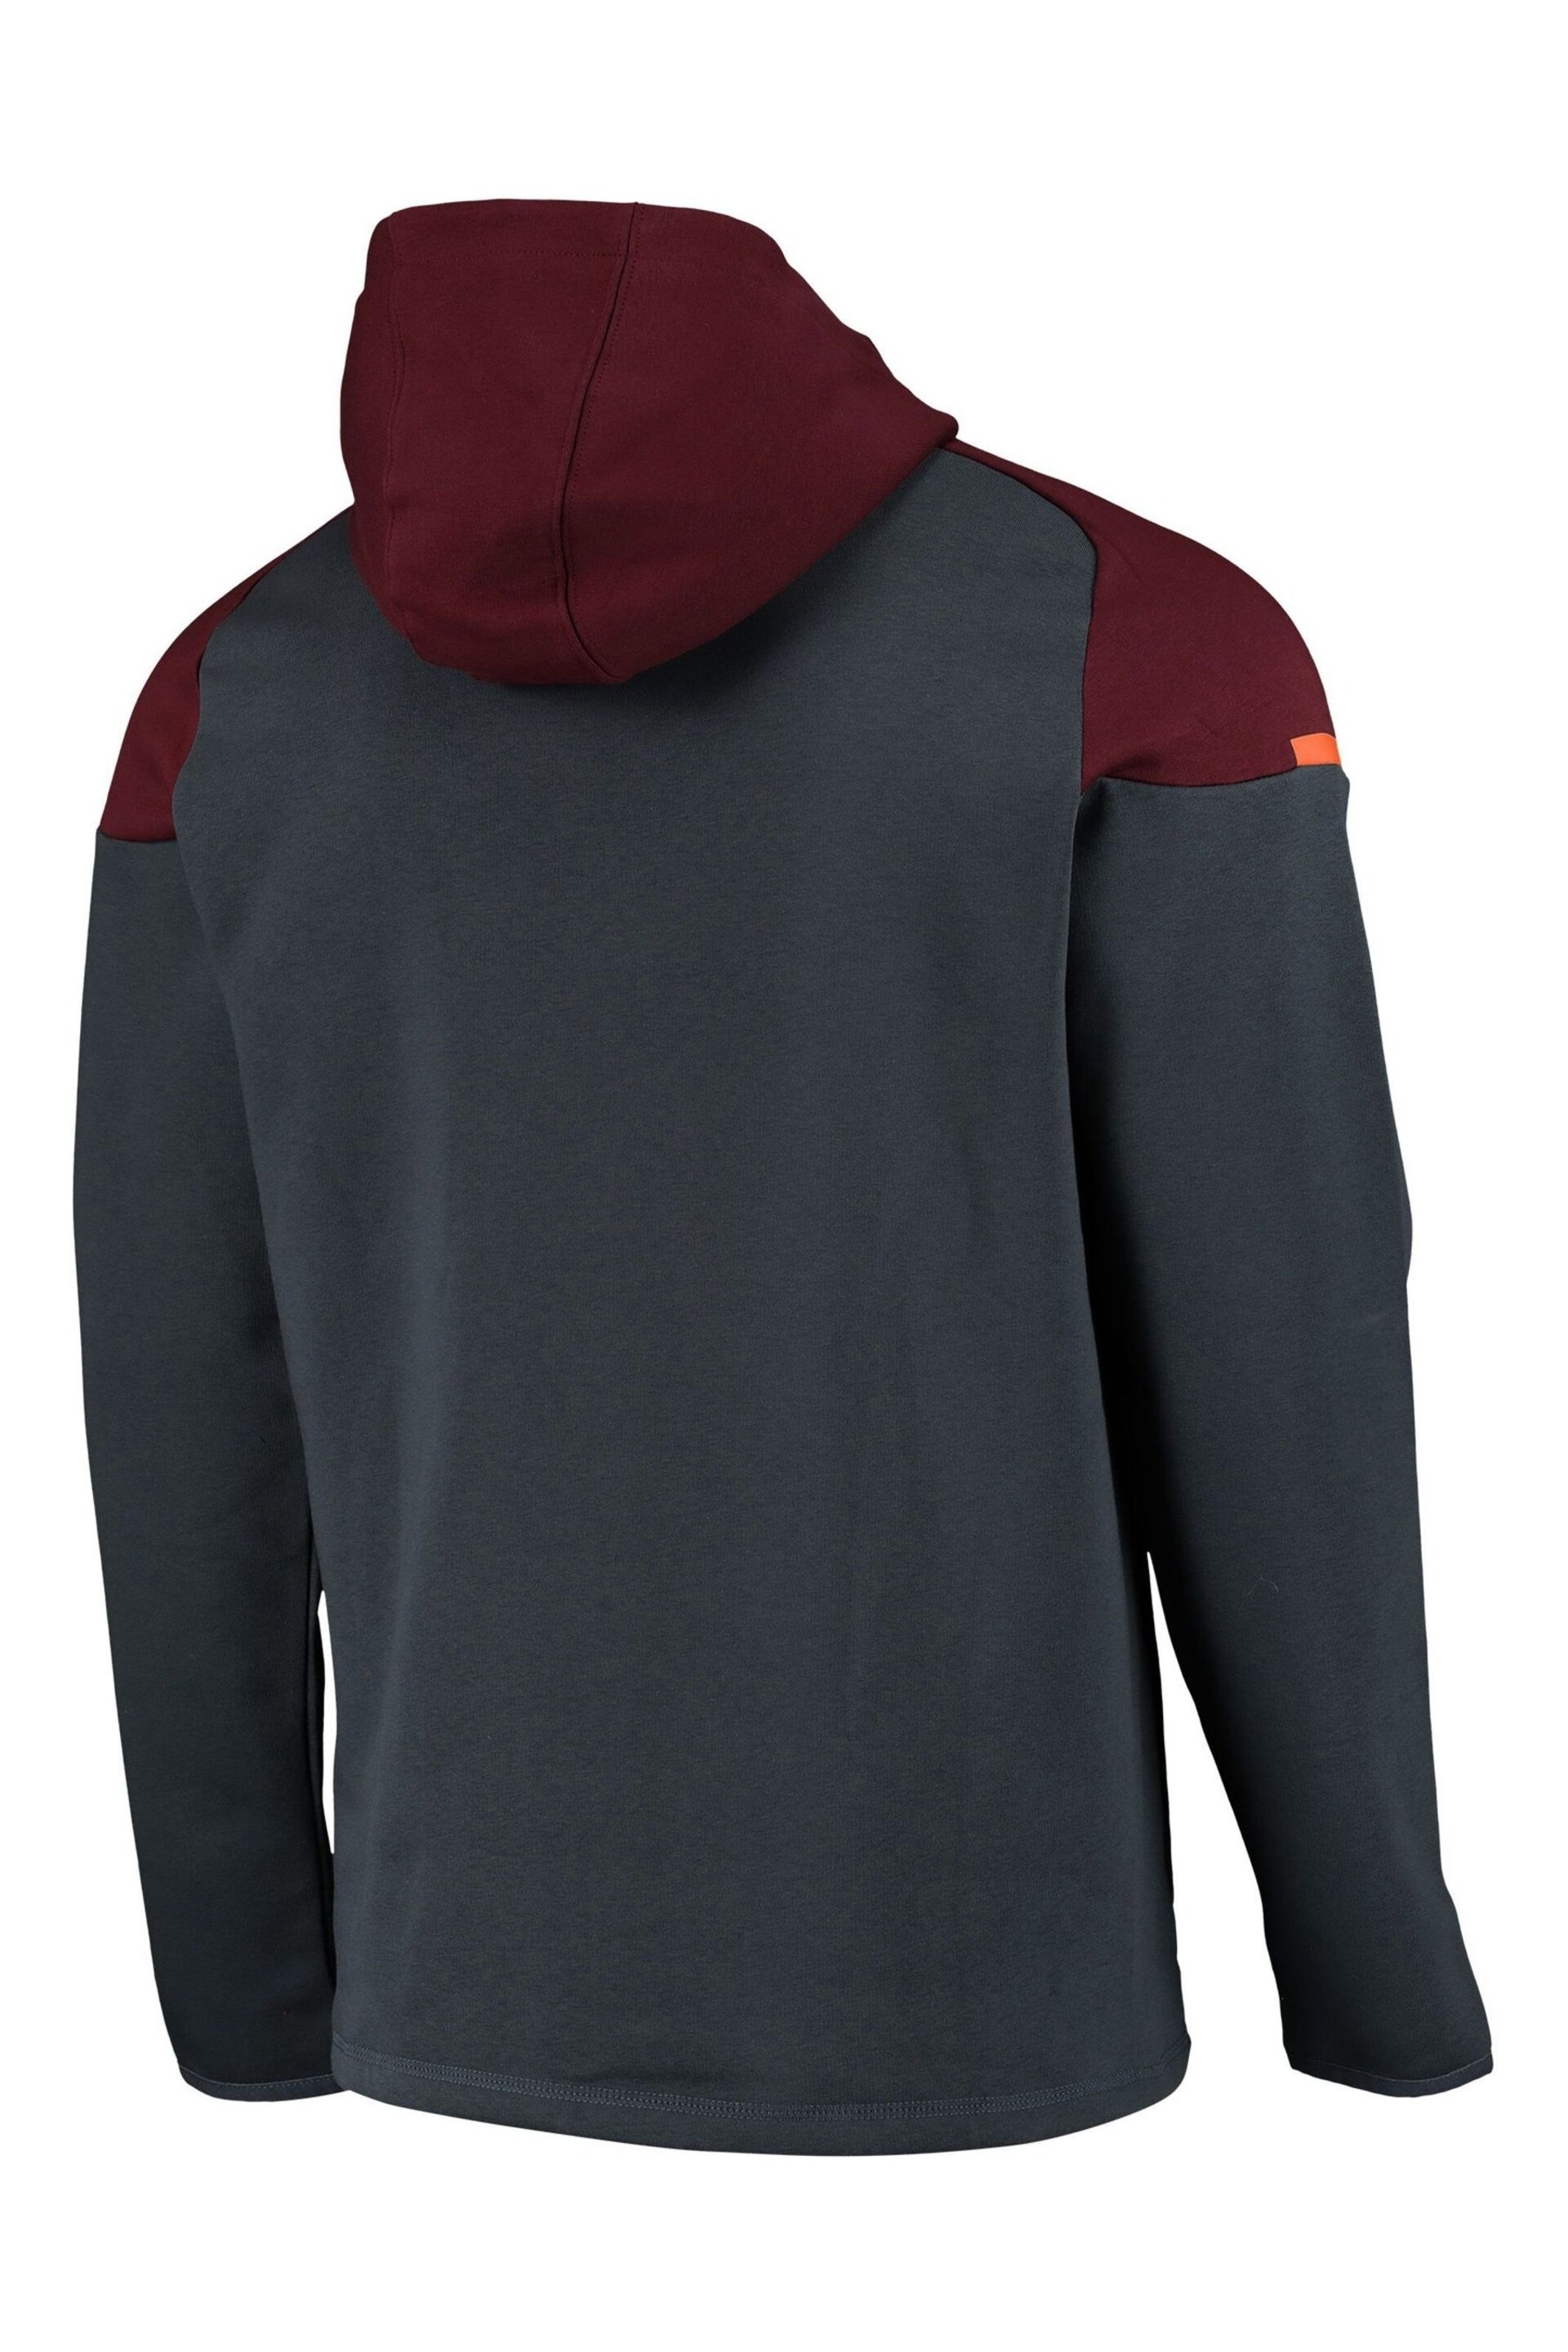 Puma Grey Manchester City Casuals Hooded Jacket - Image 3 of 3